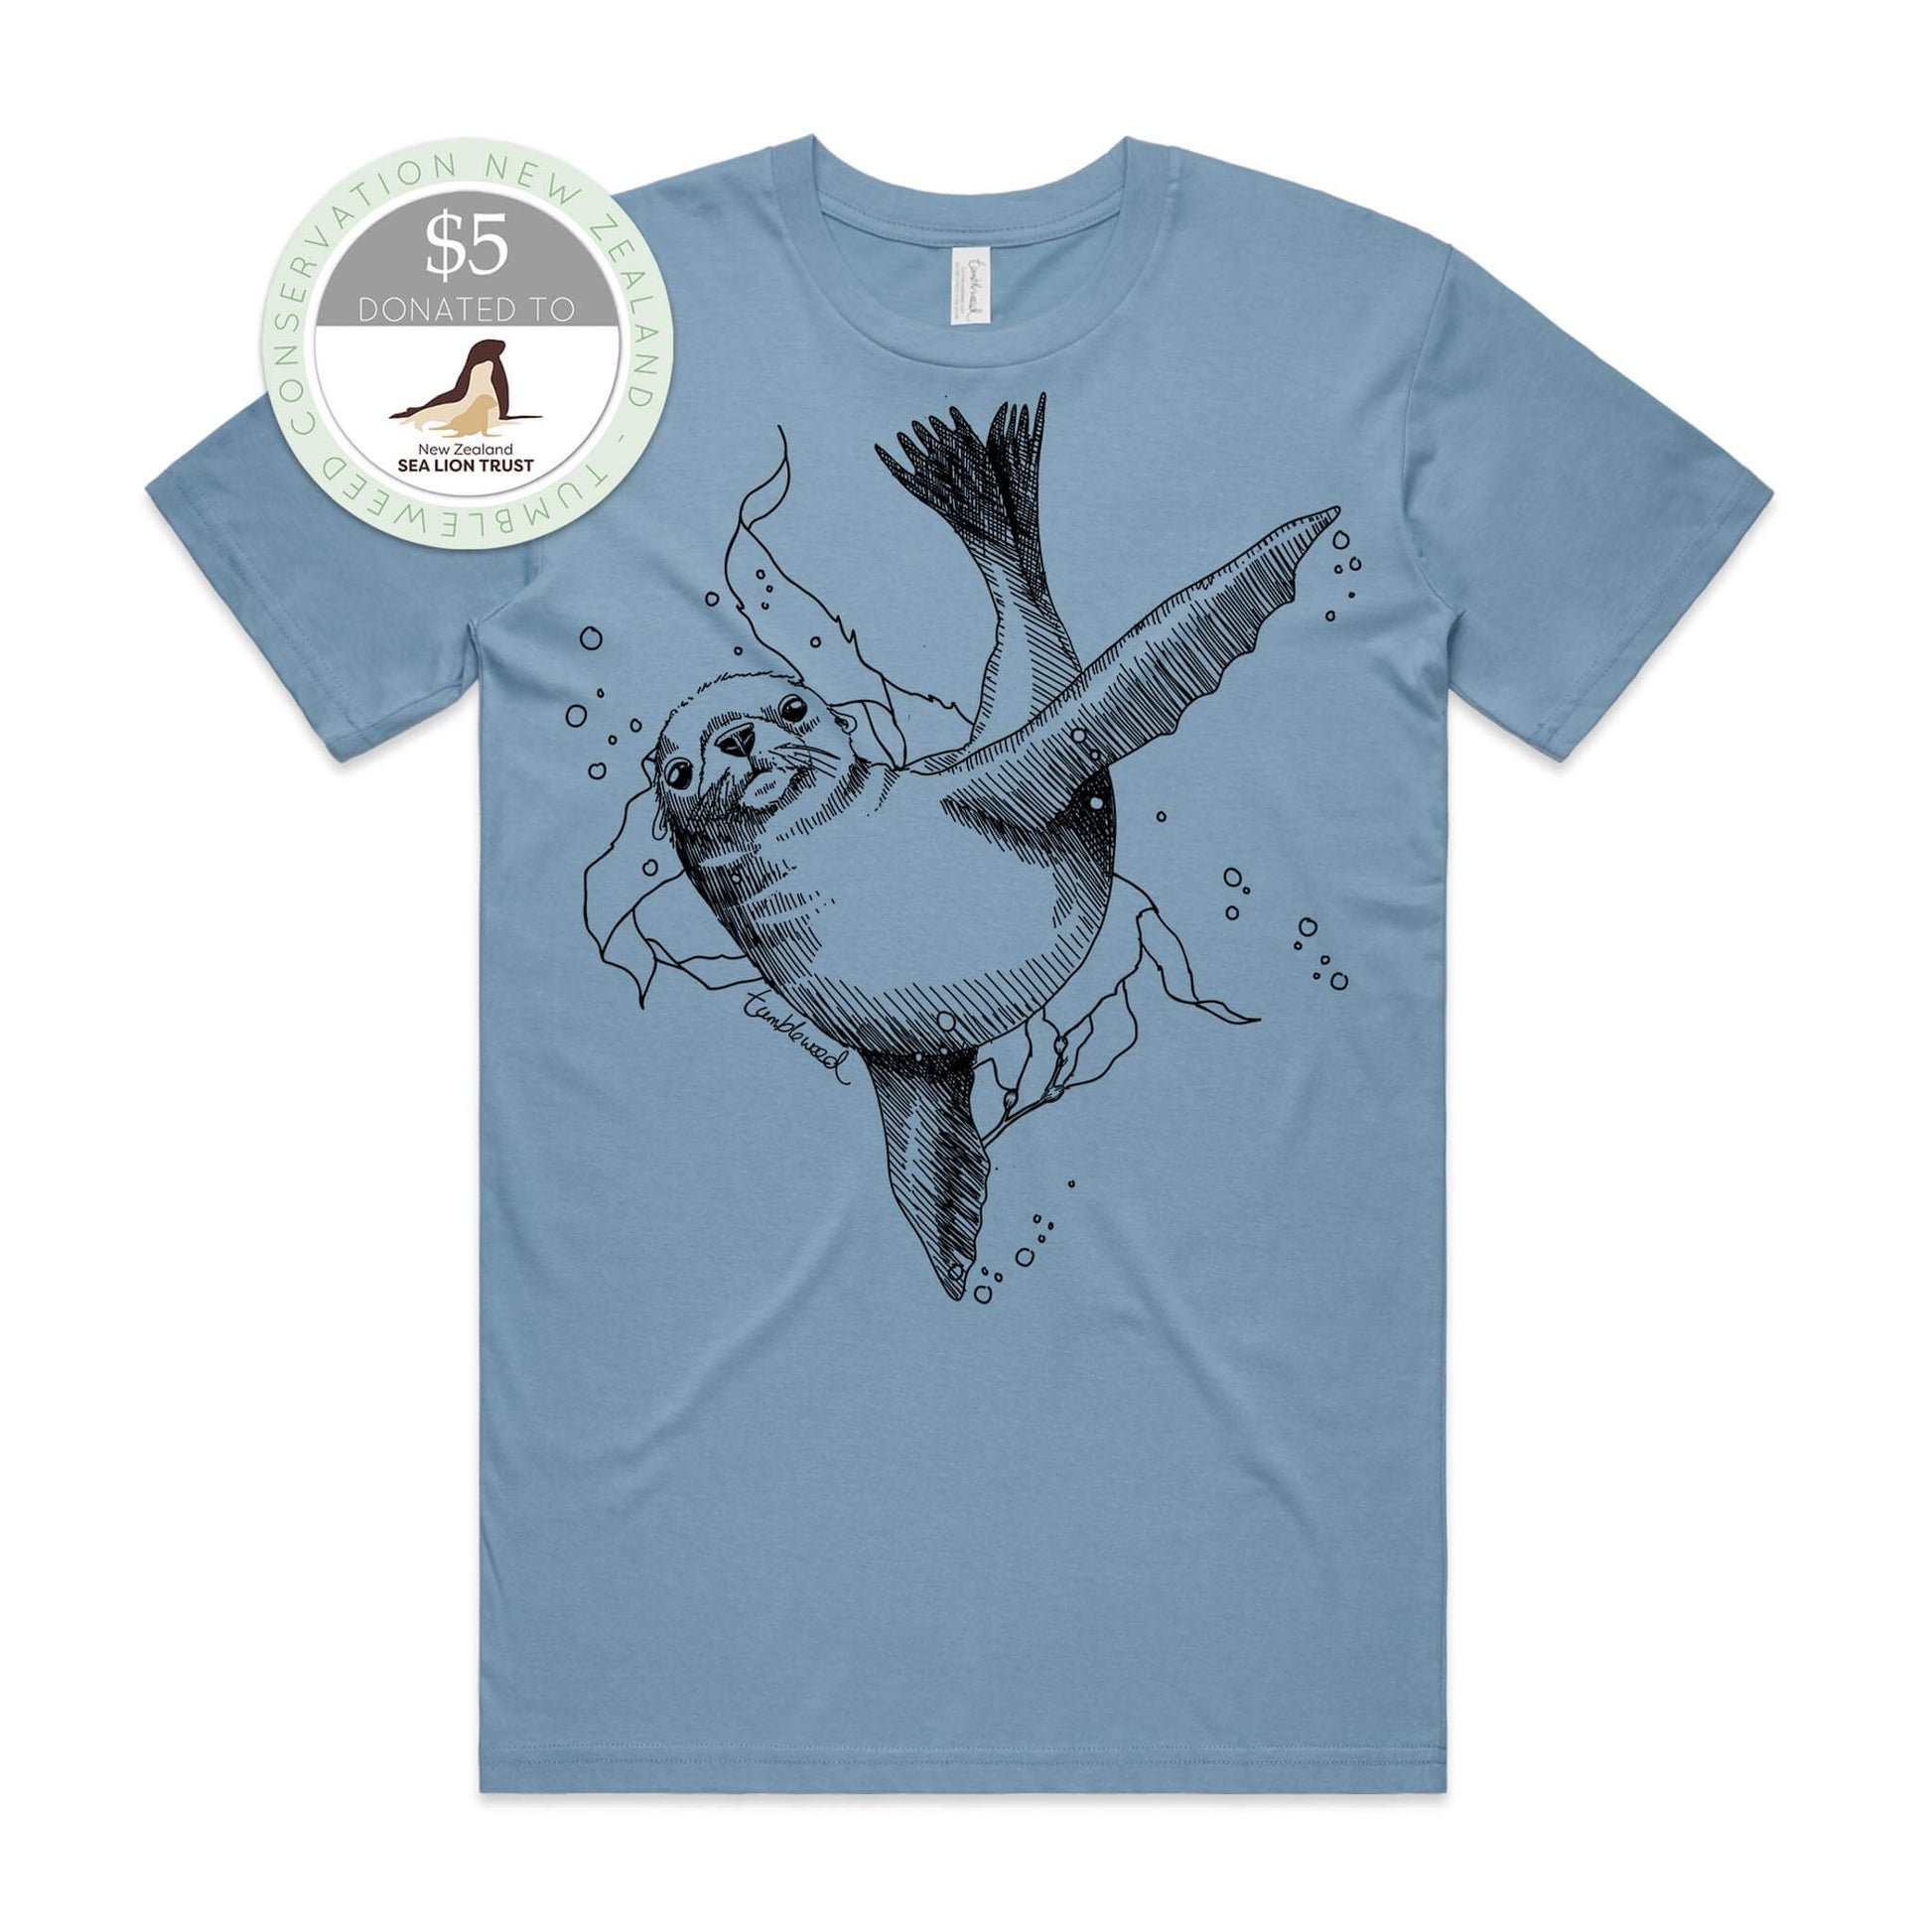 Charcoal, male t-shirt featuring a screen printed New Zealand sea lion design.